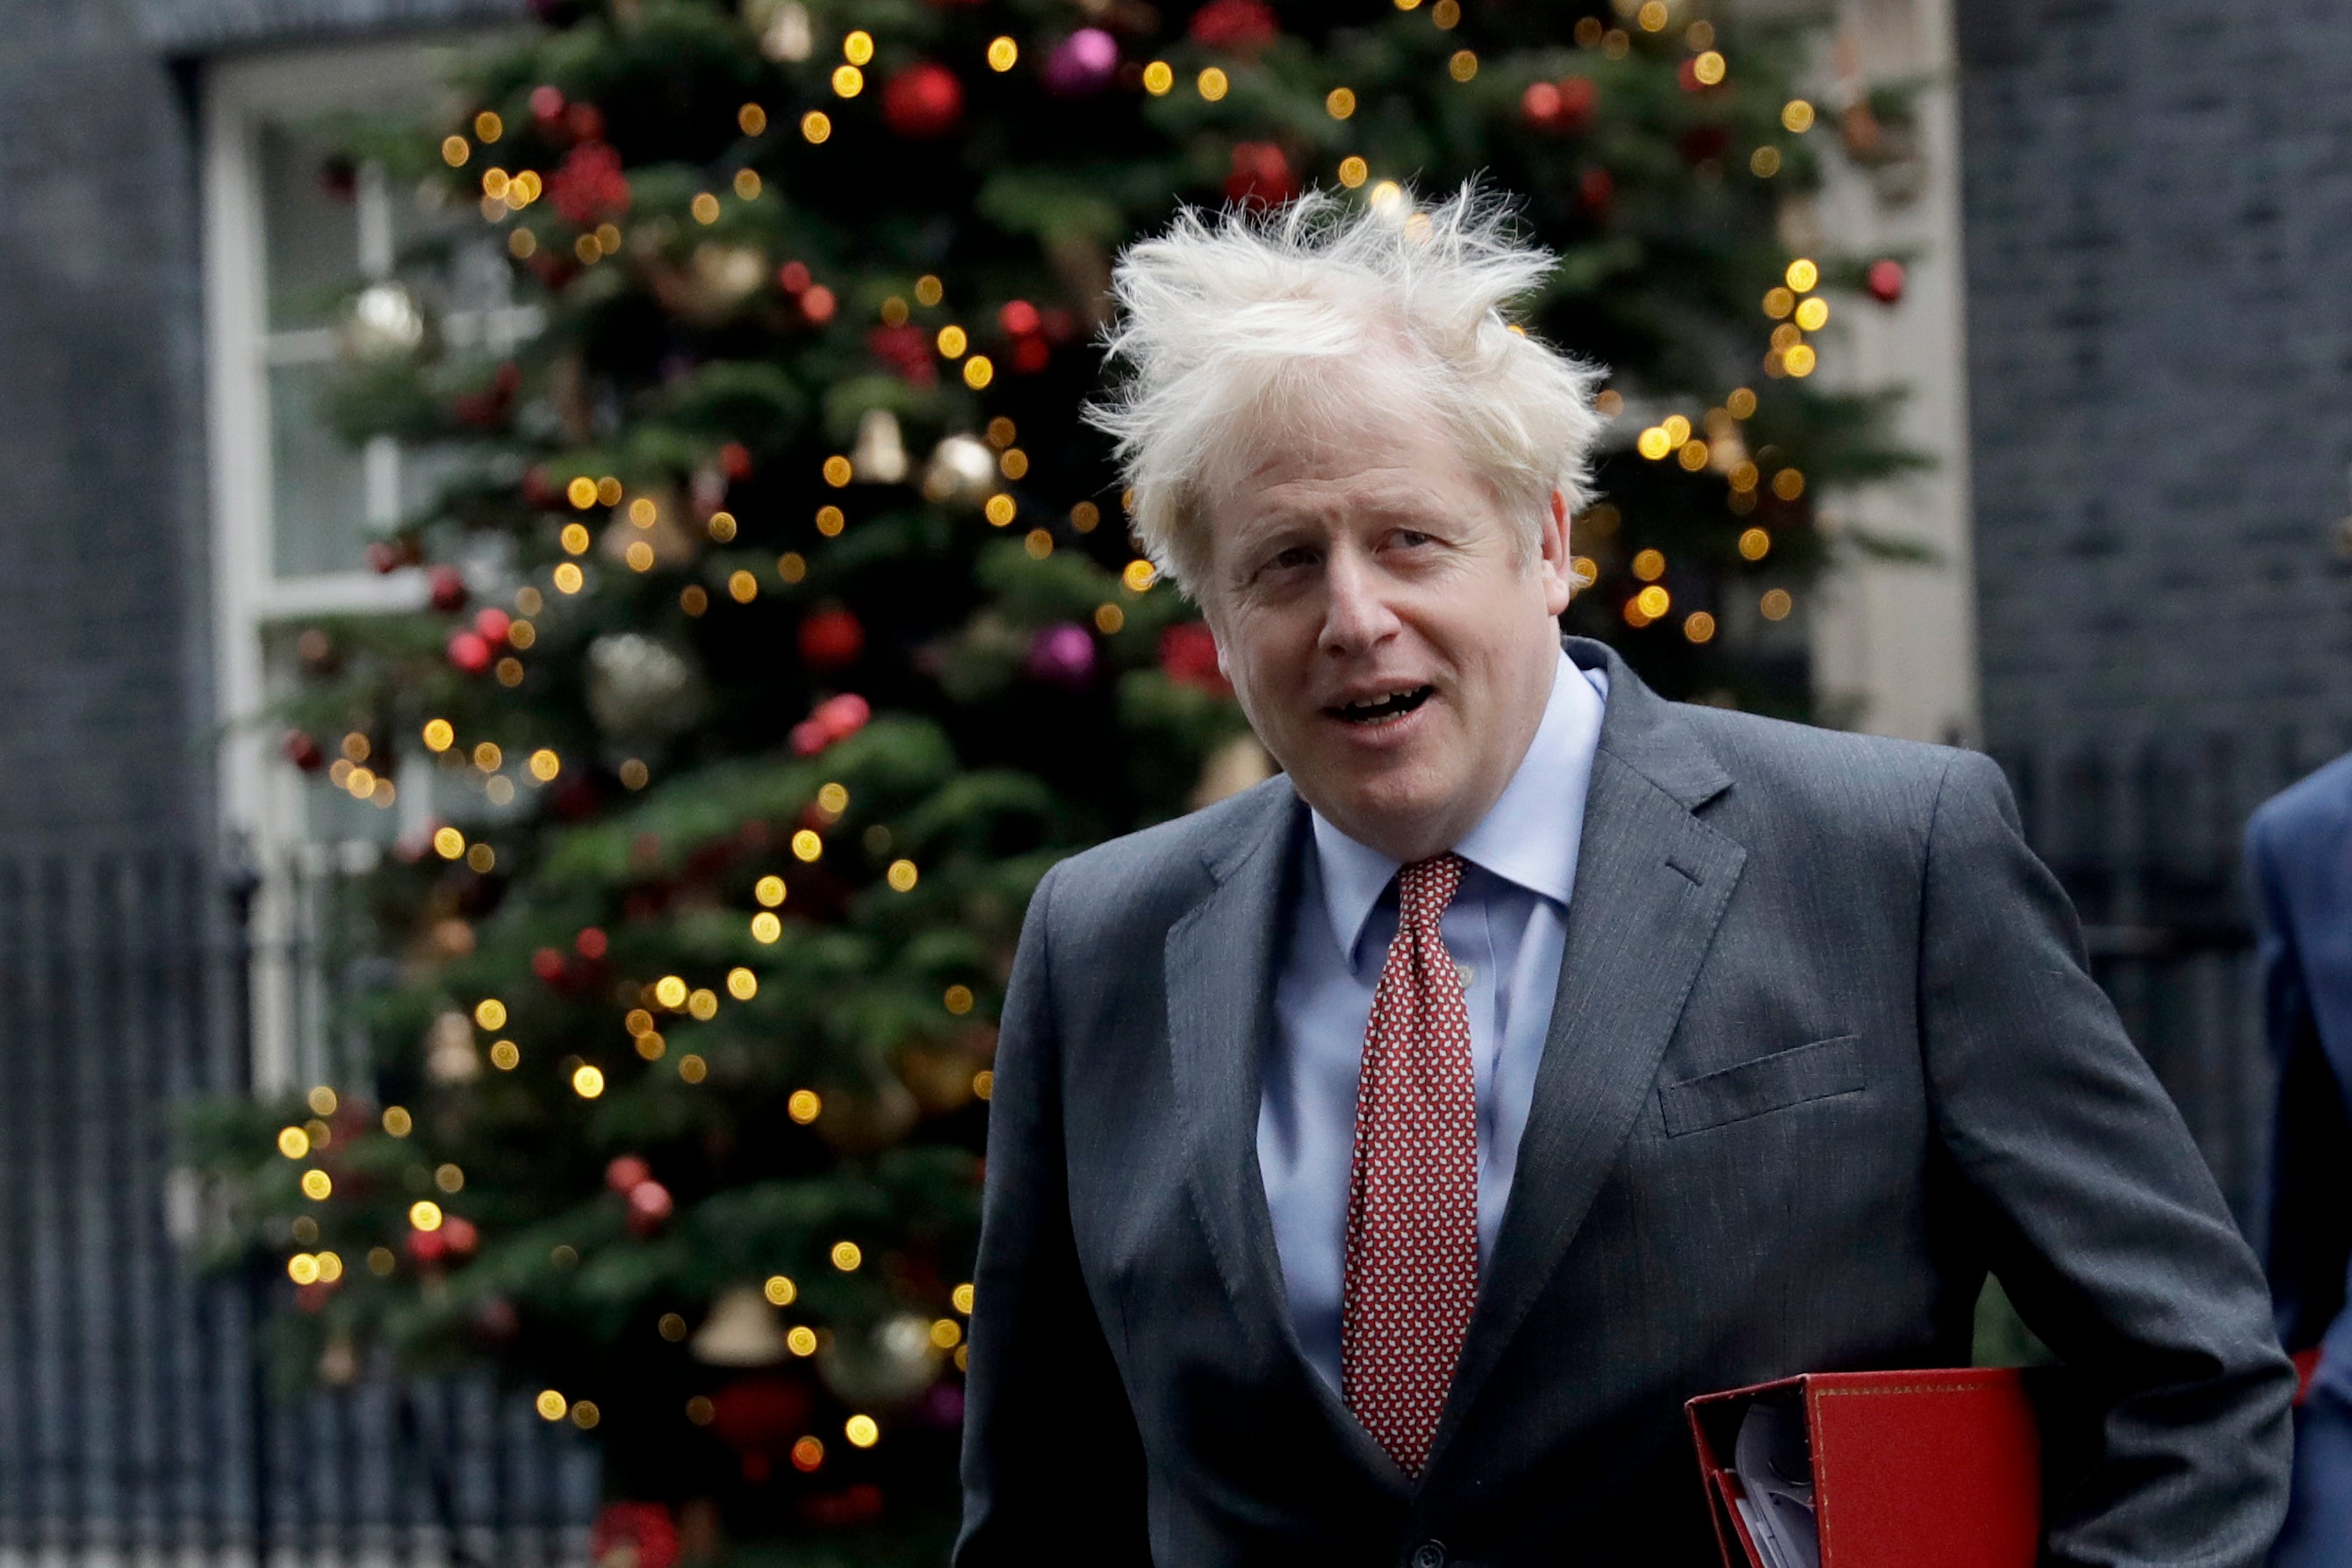 Johnson warned of possible third wave after festive period